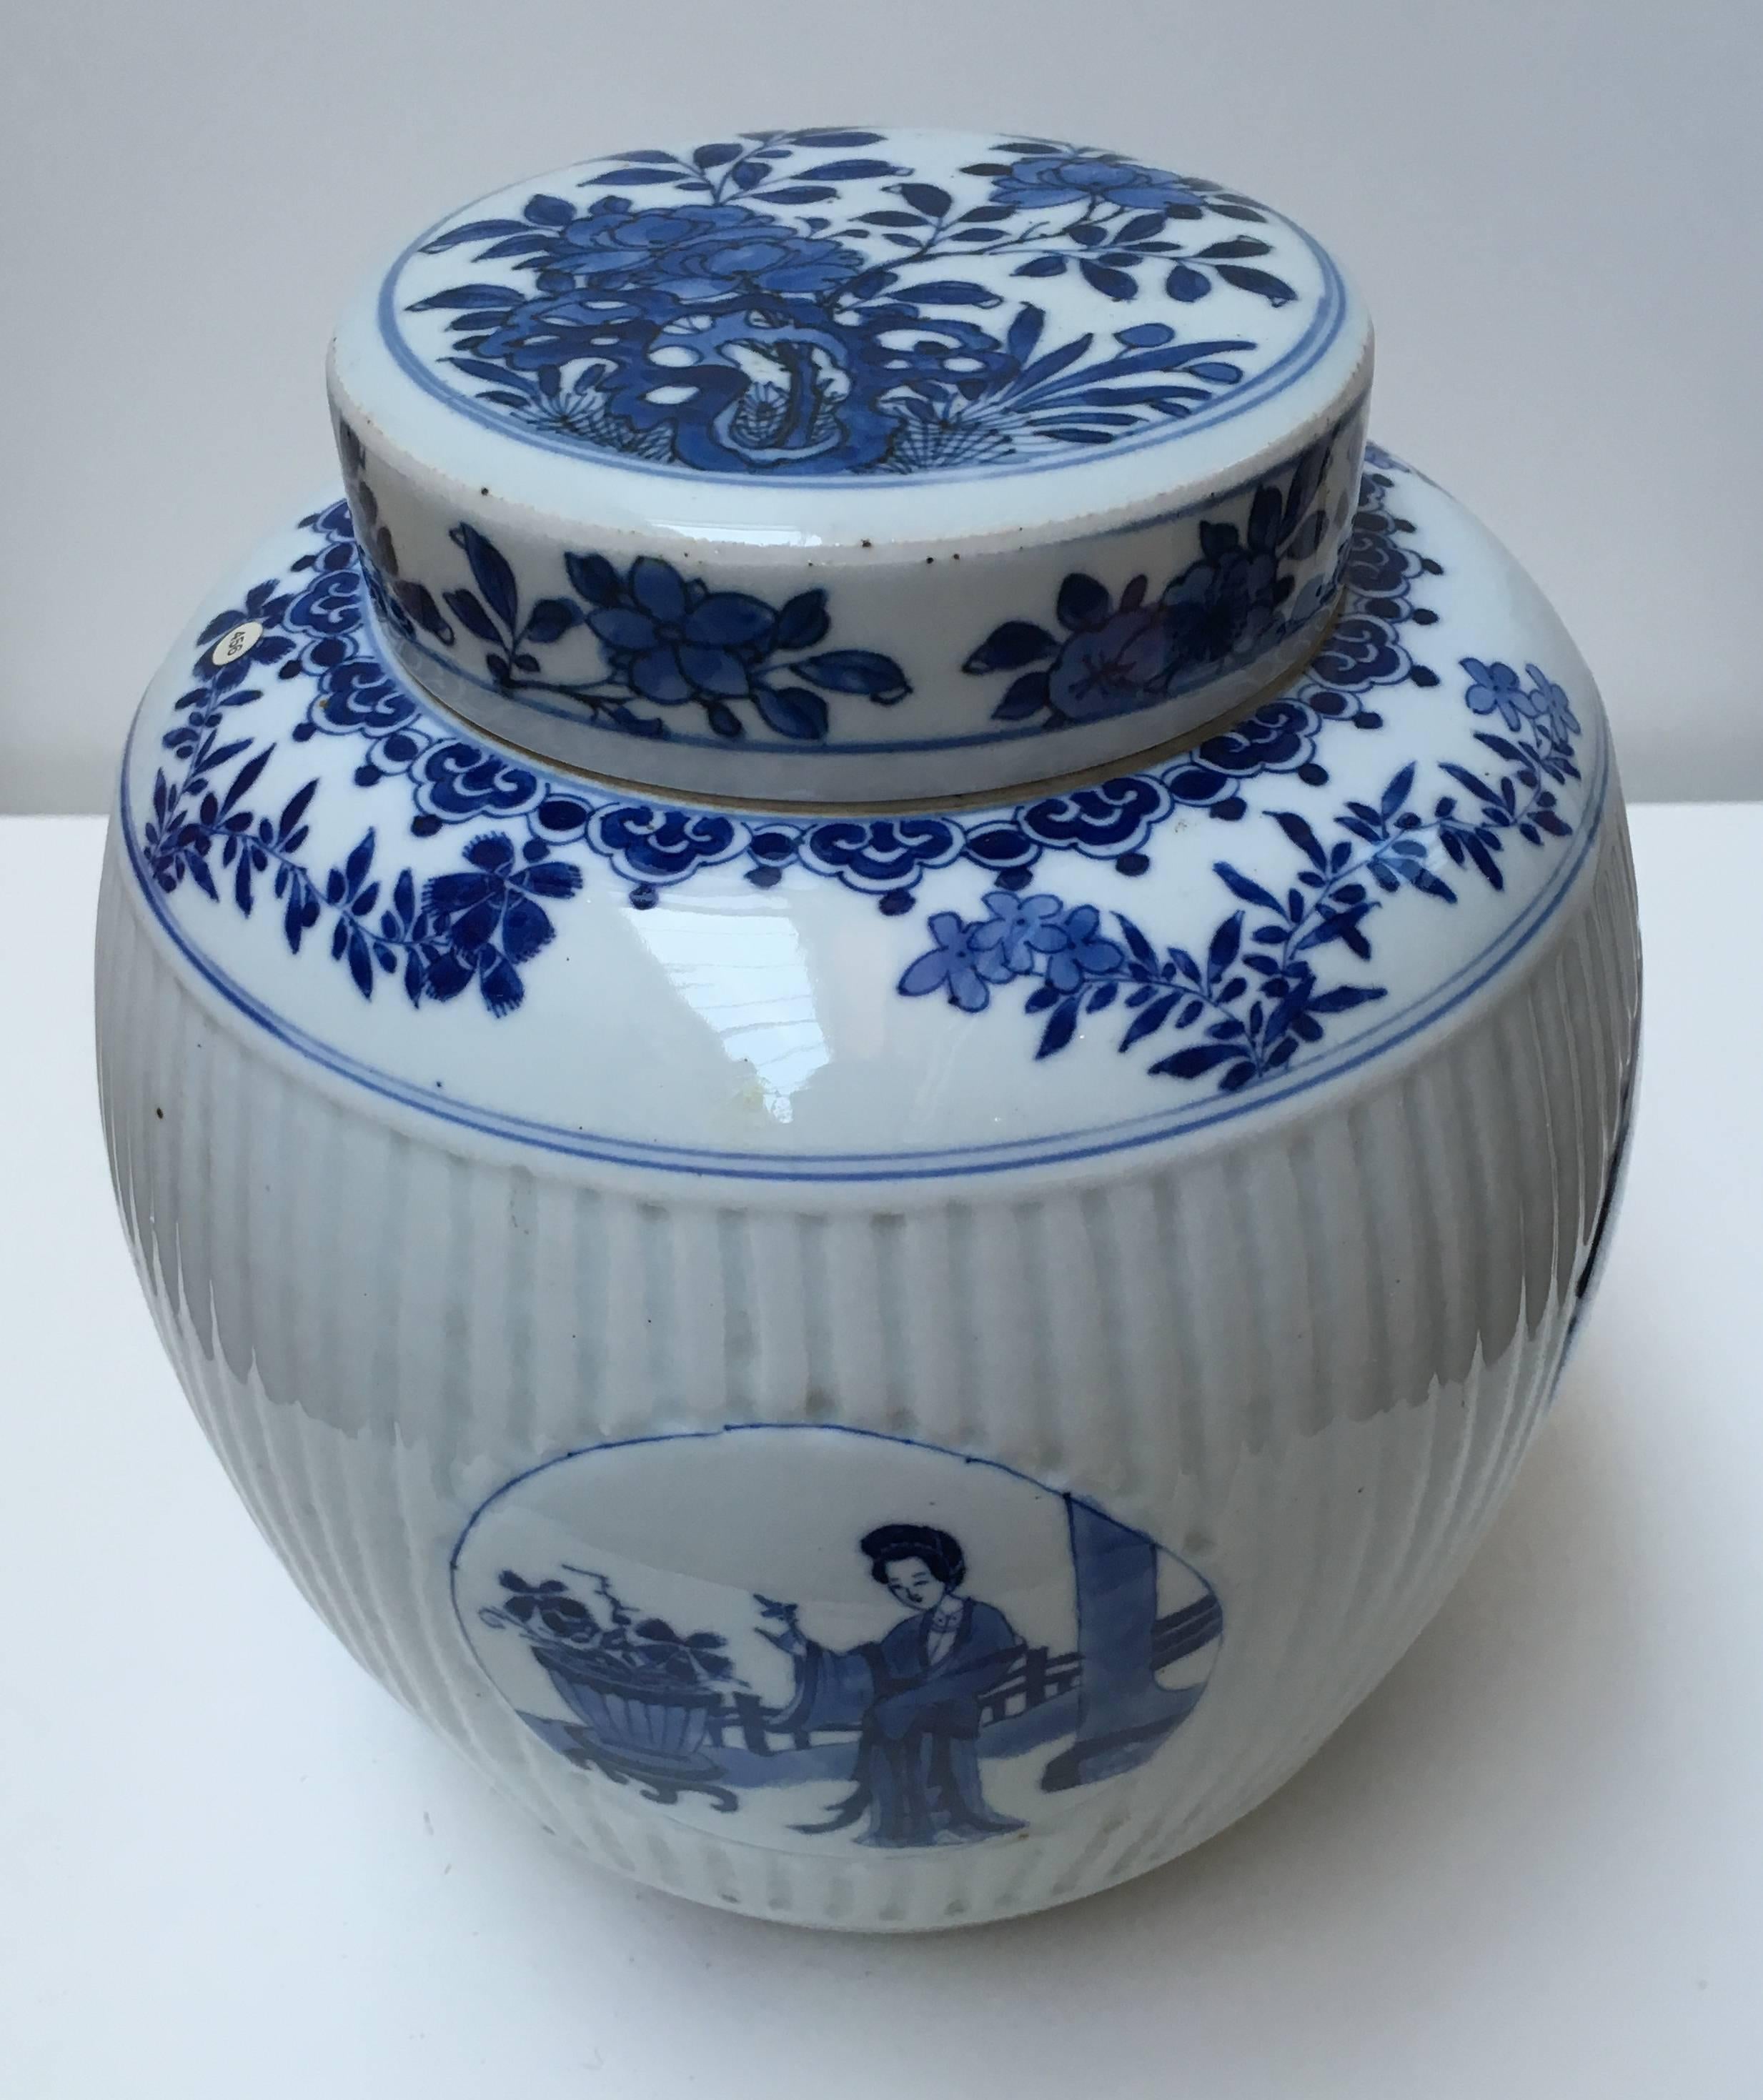 Ovoid, with ribbed middle section, the wide cylindrical cover over a short unglazed neck, decorated in underglaze blue with four medallions with scenes of two Chinese ladies. The top, bottom and cover decorated with floral motifs.

Comparative